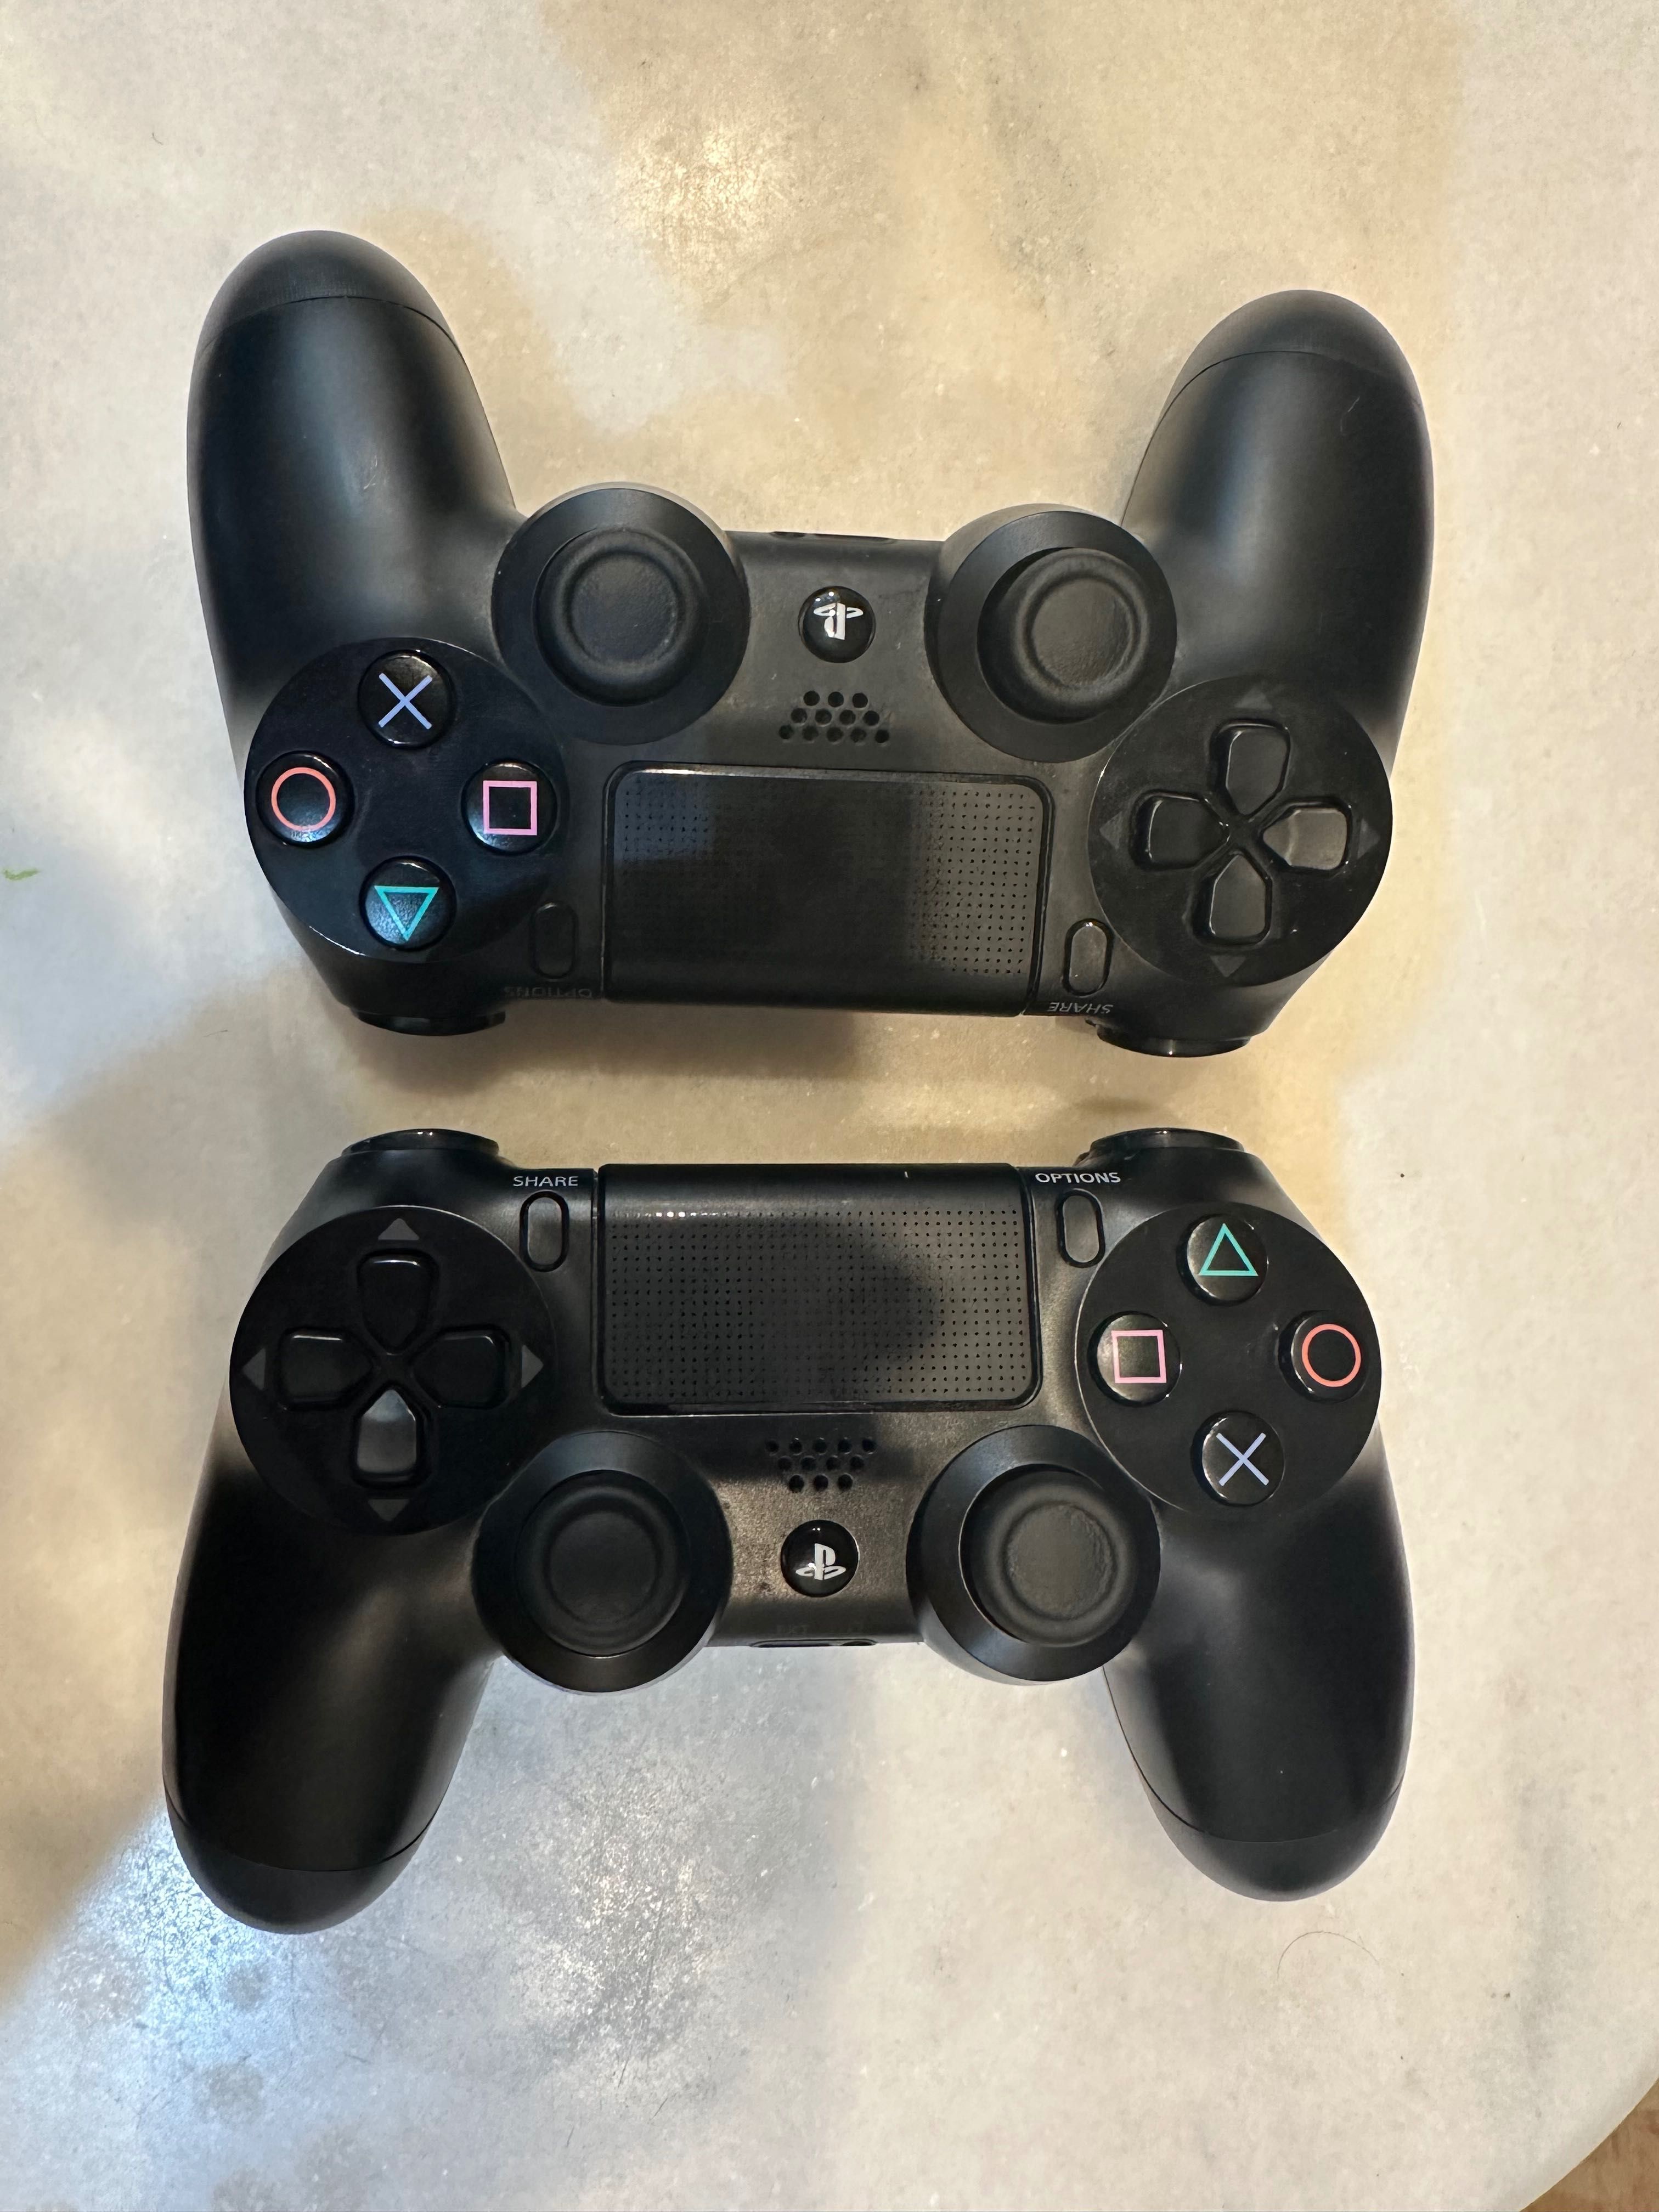 PS4 fat 500gb + 2 controllers